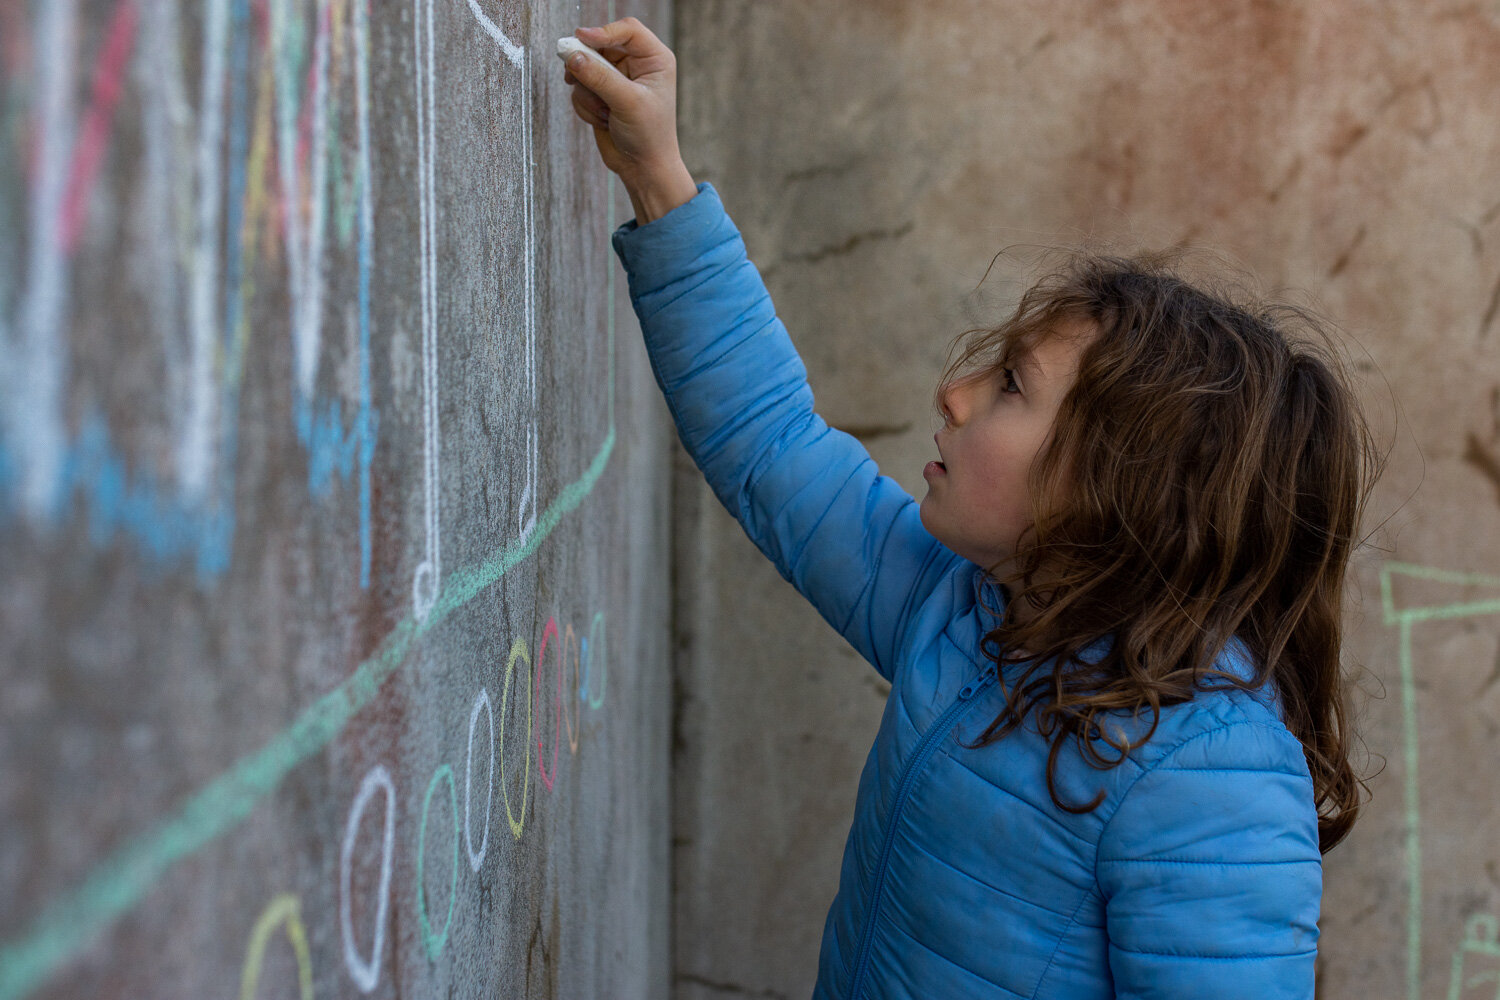 Girl with curls blue coat drawing on wall with chalk